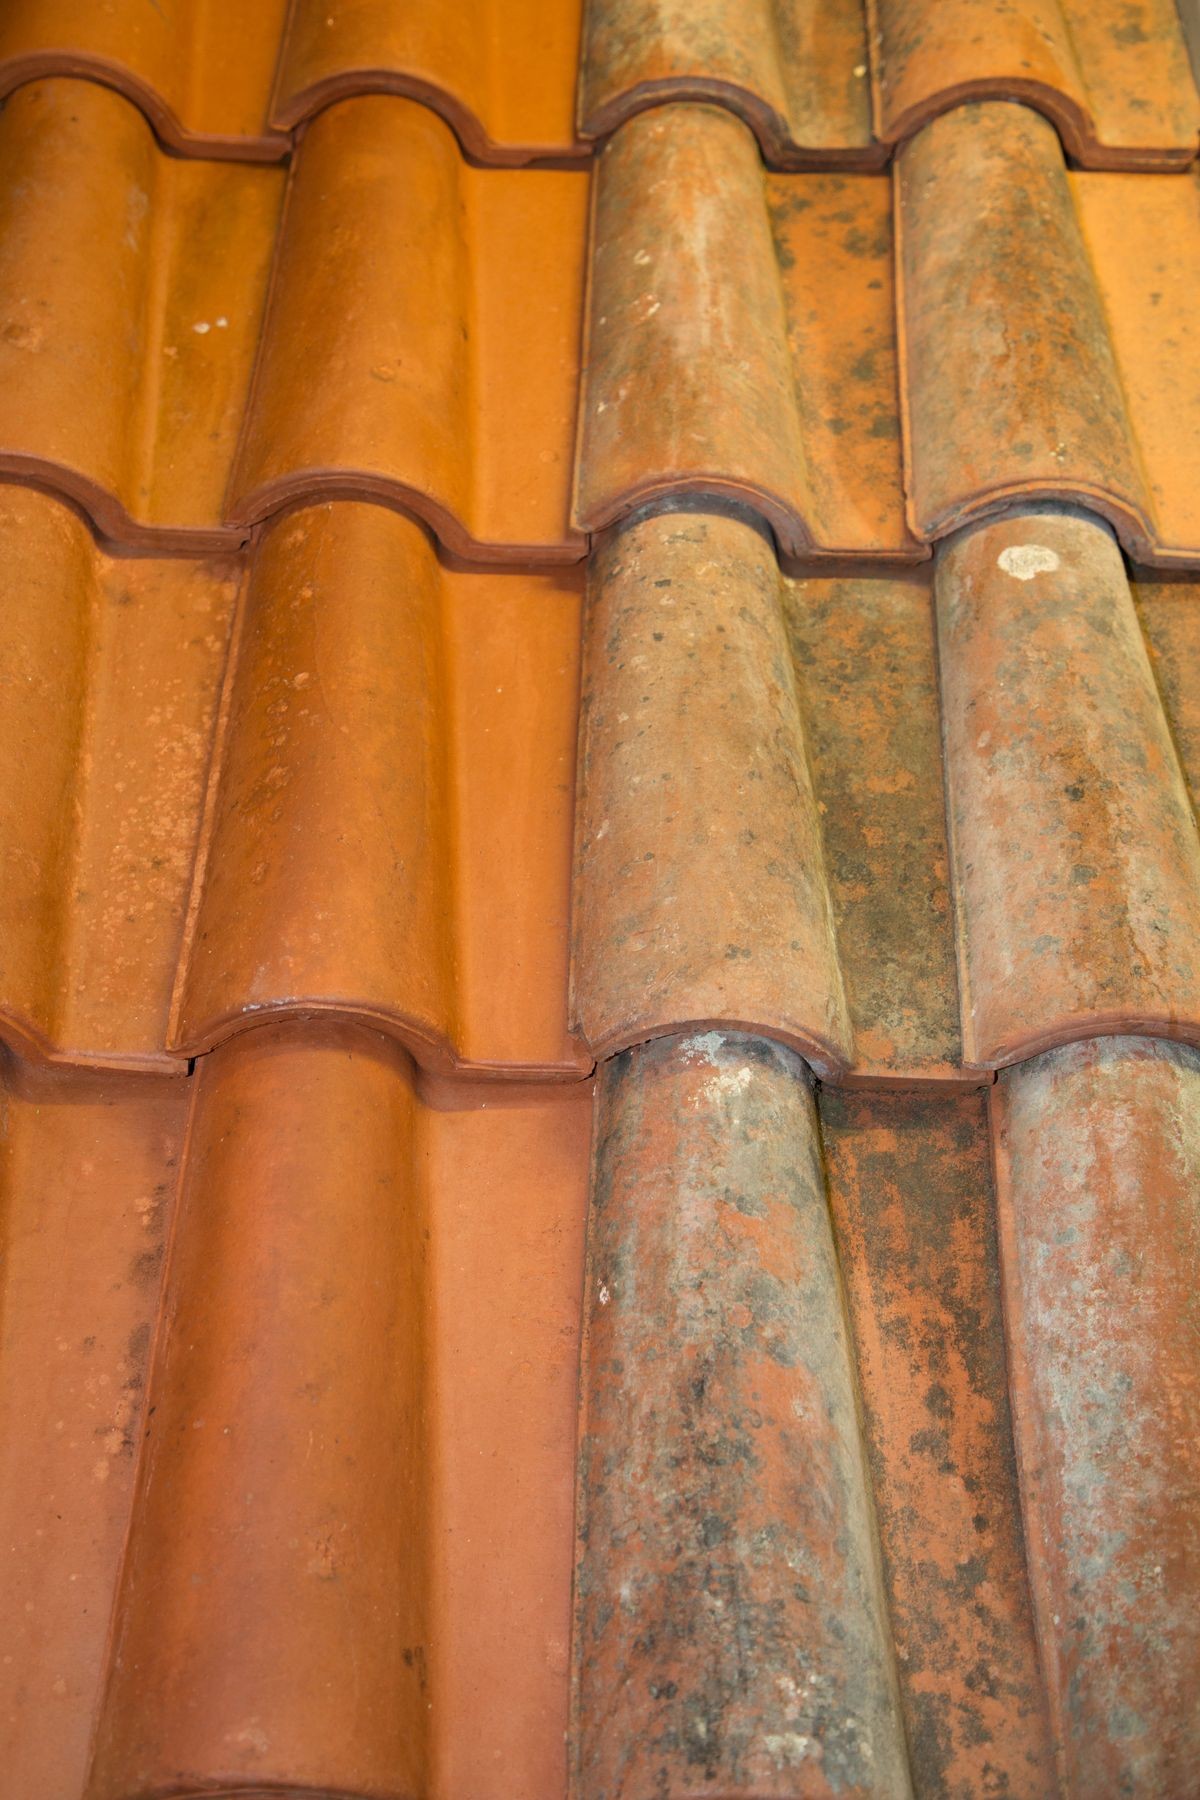 Old and new roof tiles side by side clean and dirty